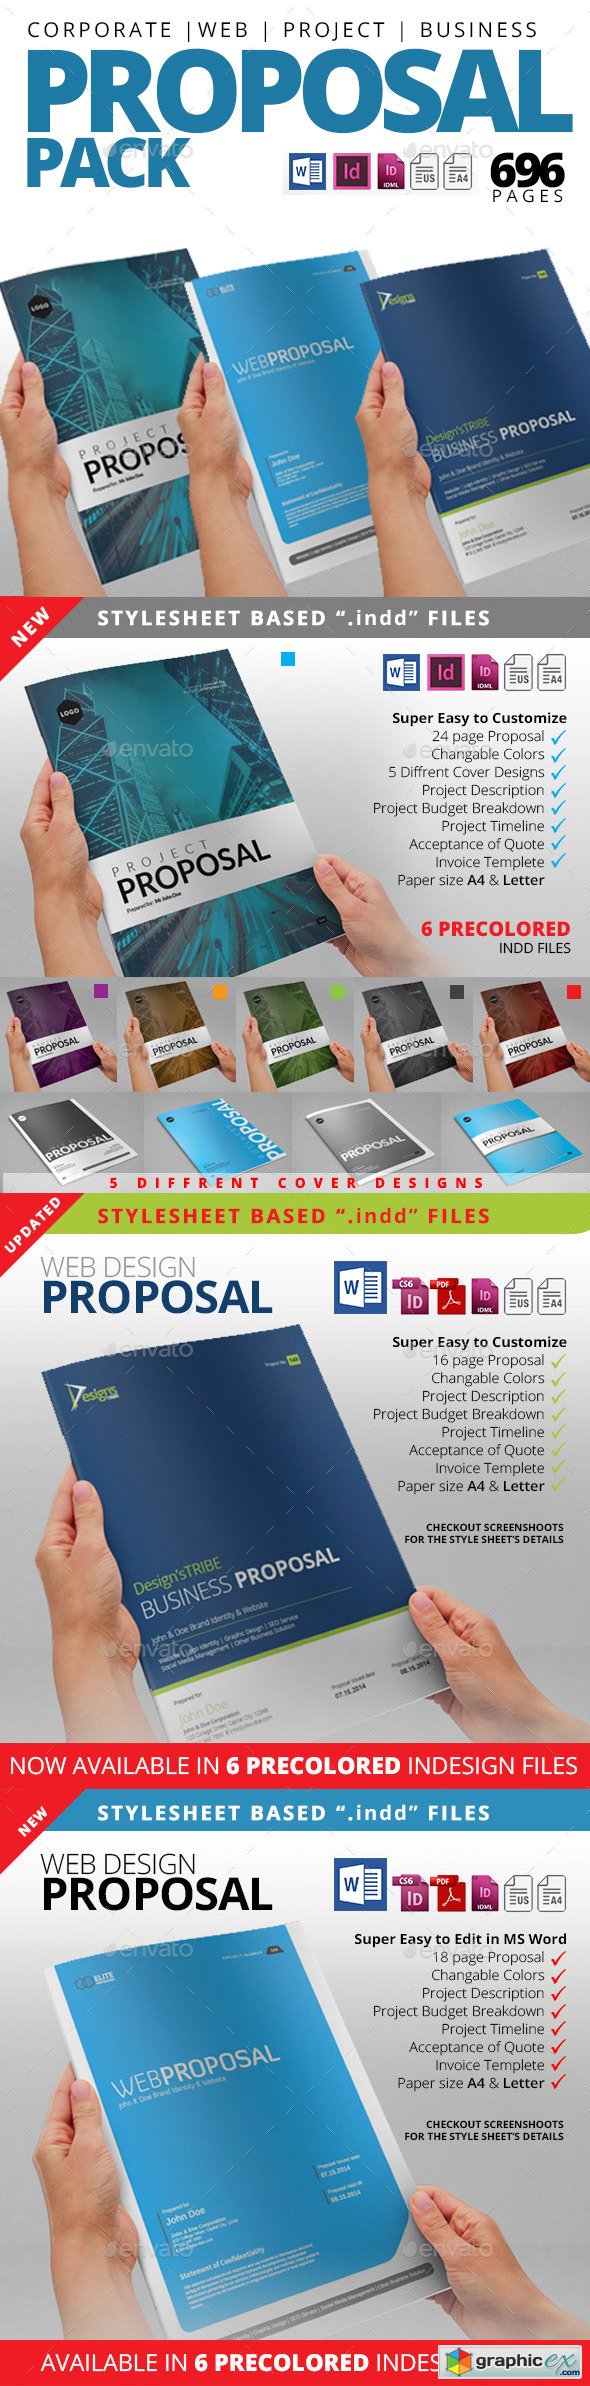 Proposal Pack 1